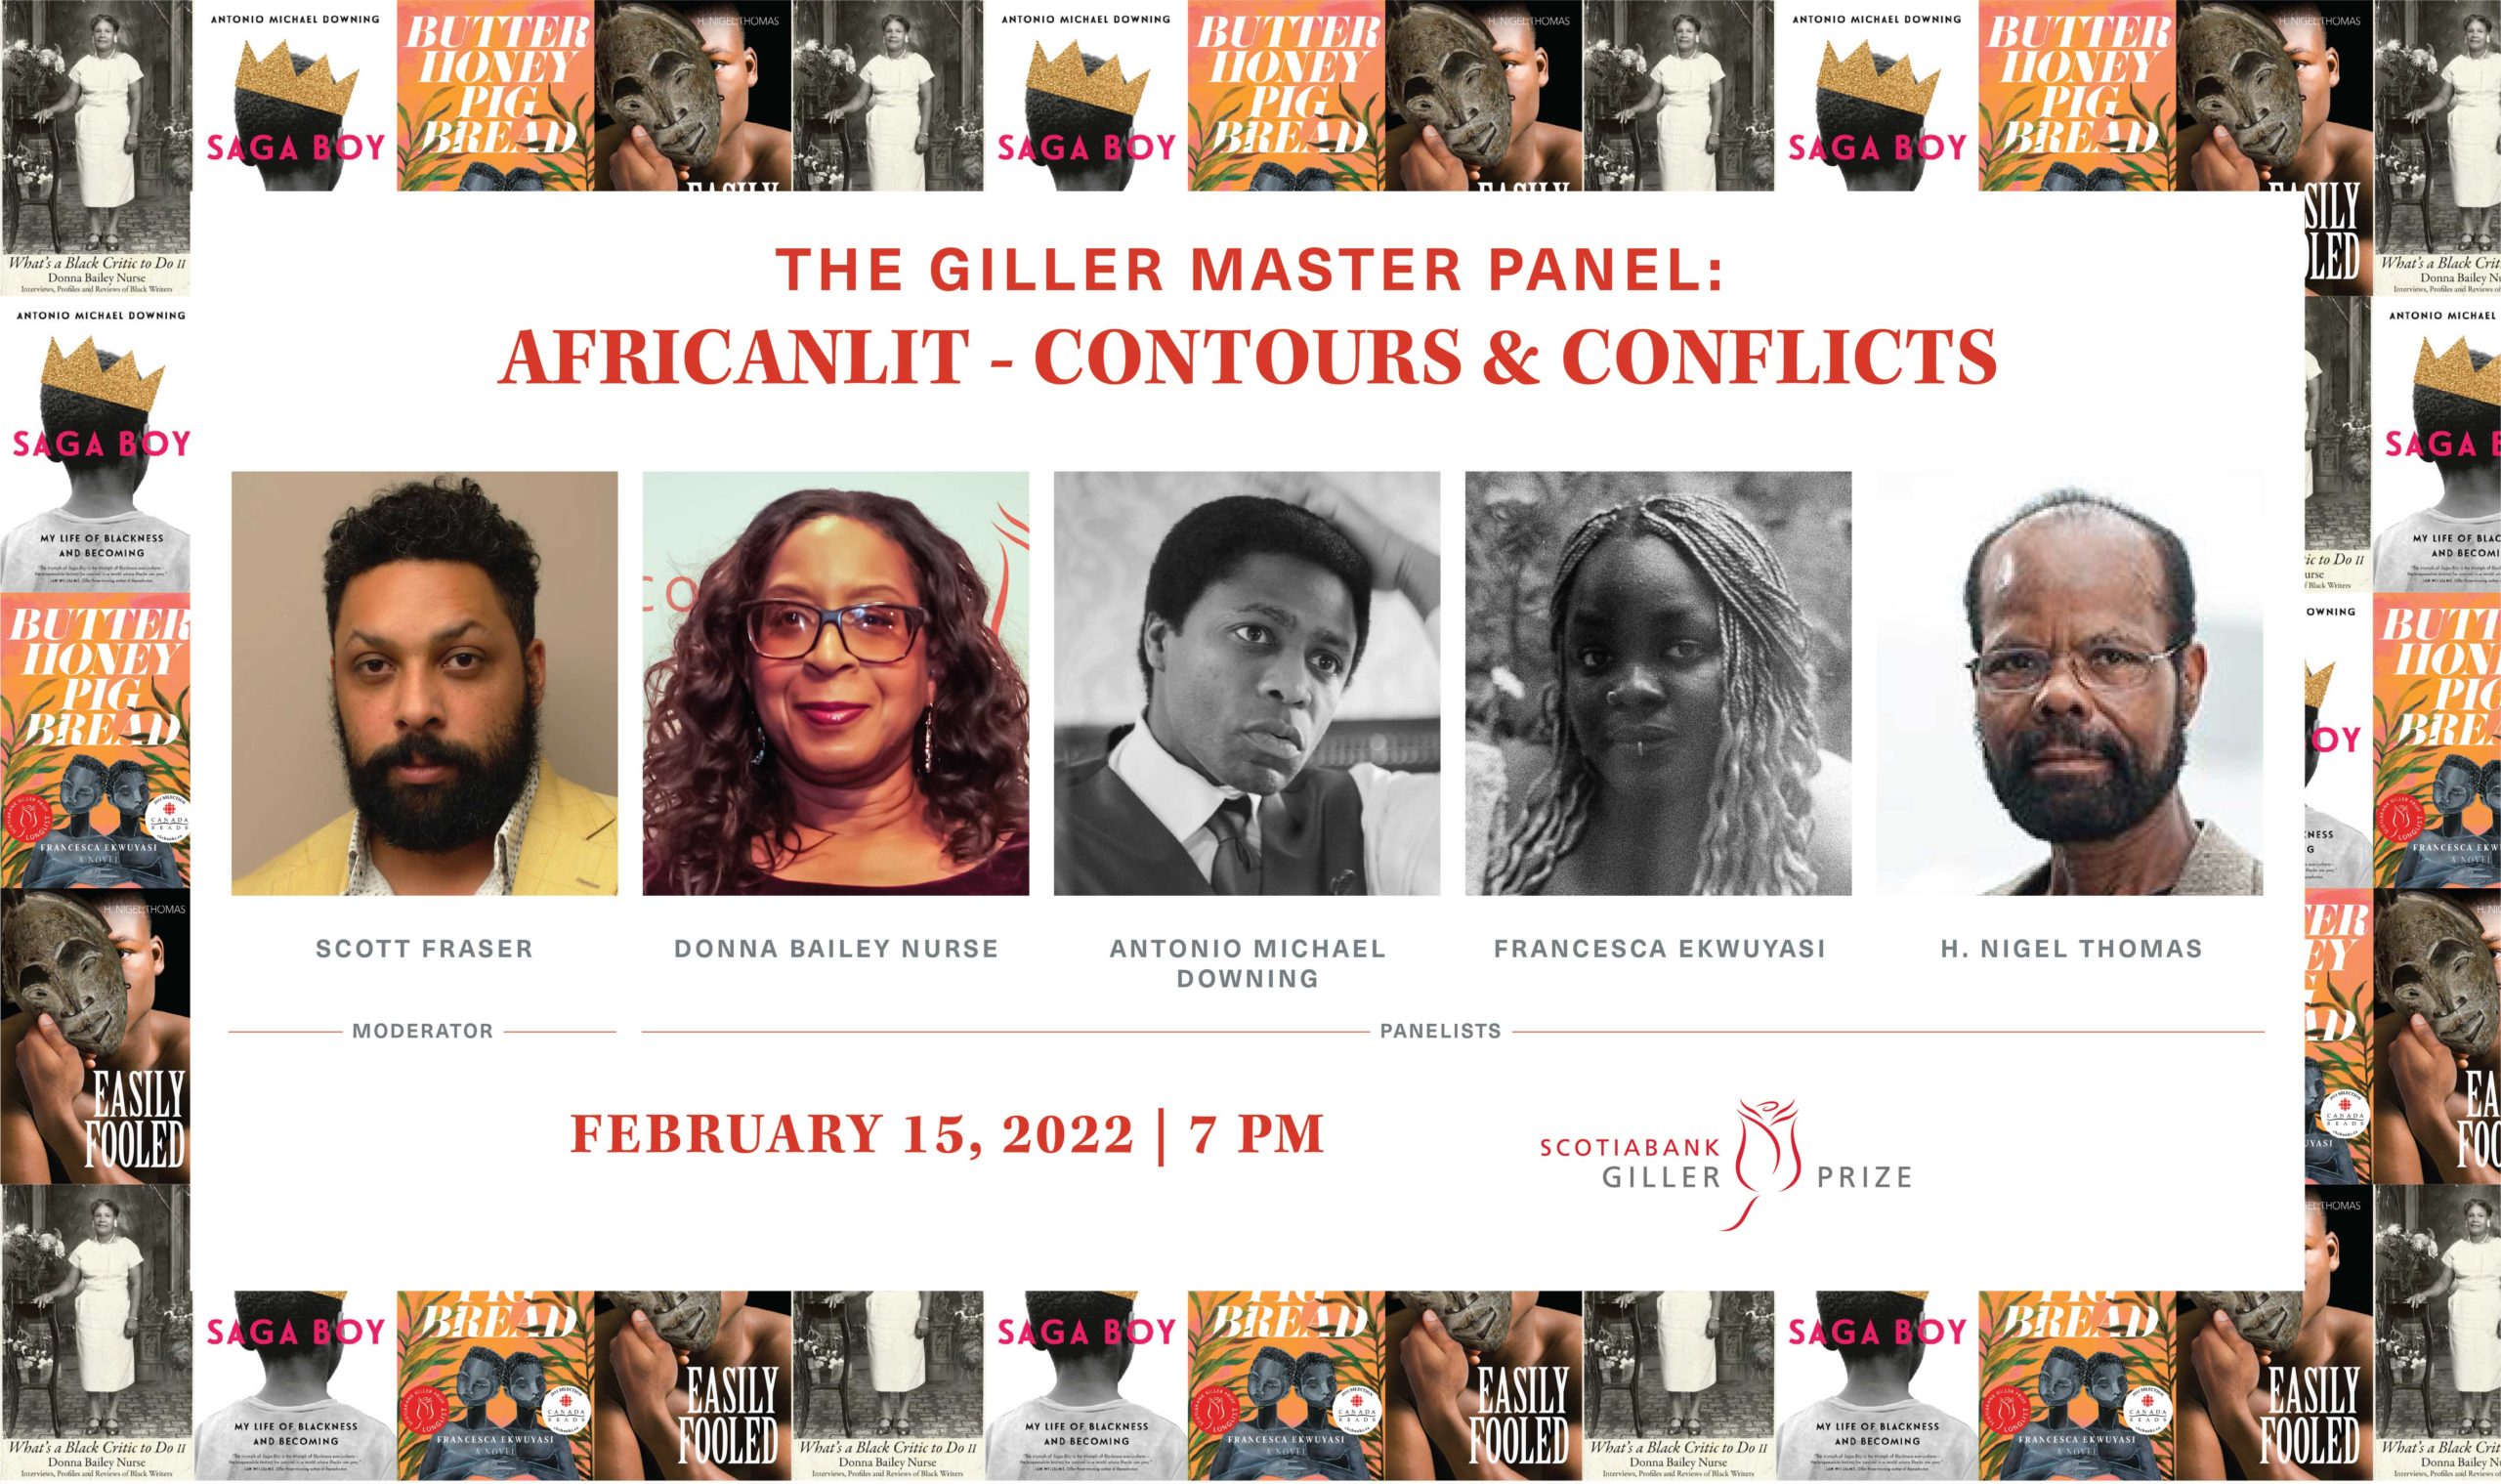 Giller Master Panel: AfriCanLit - Contours & Conflicts